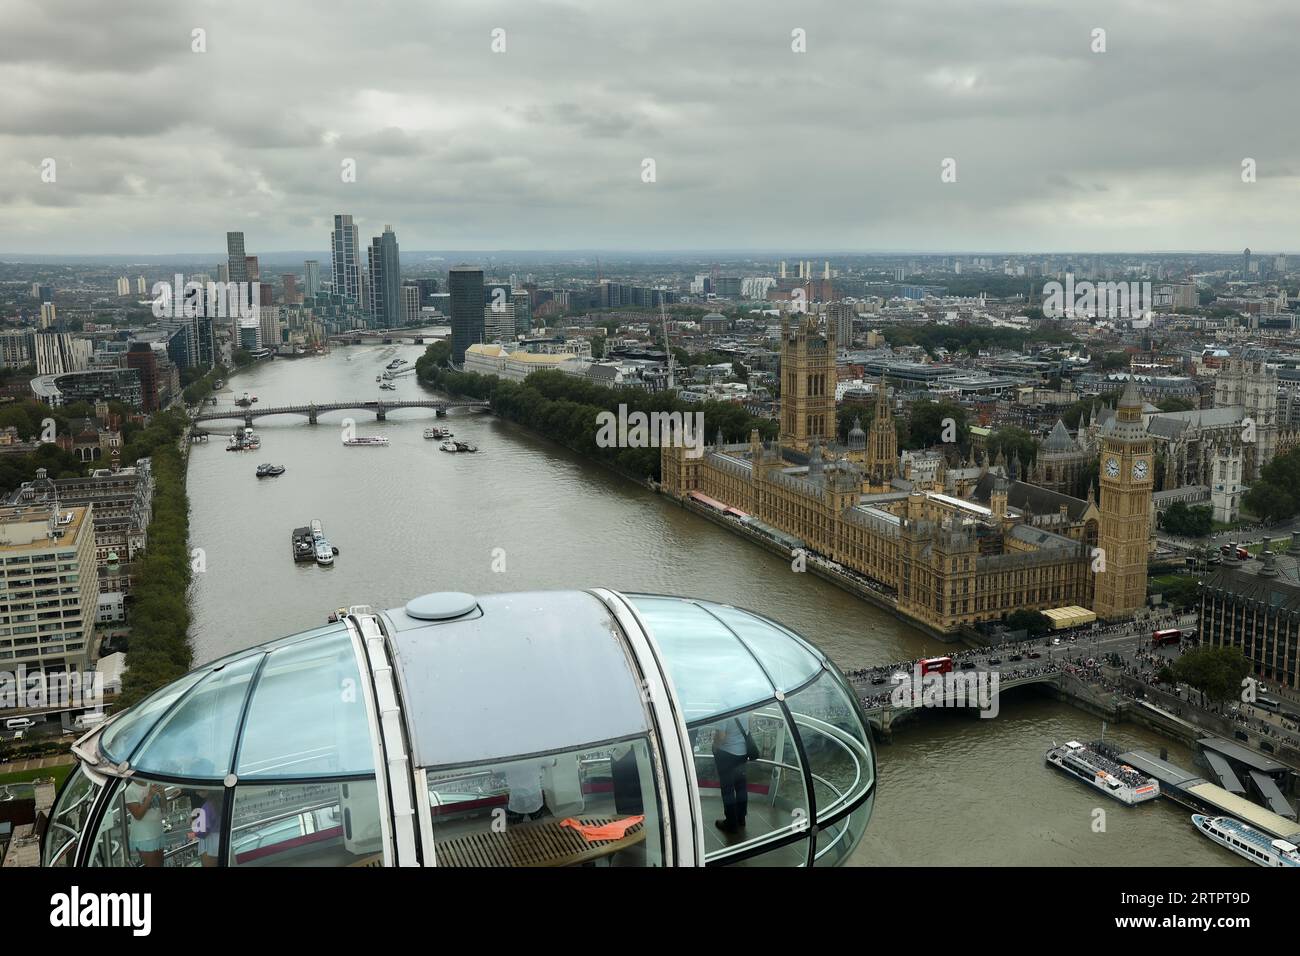 The River Thames and the Palace of Parliament seen from above from the eye of London. Stock Photo